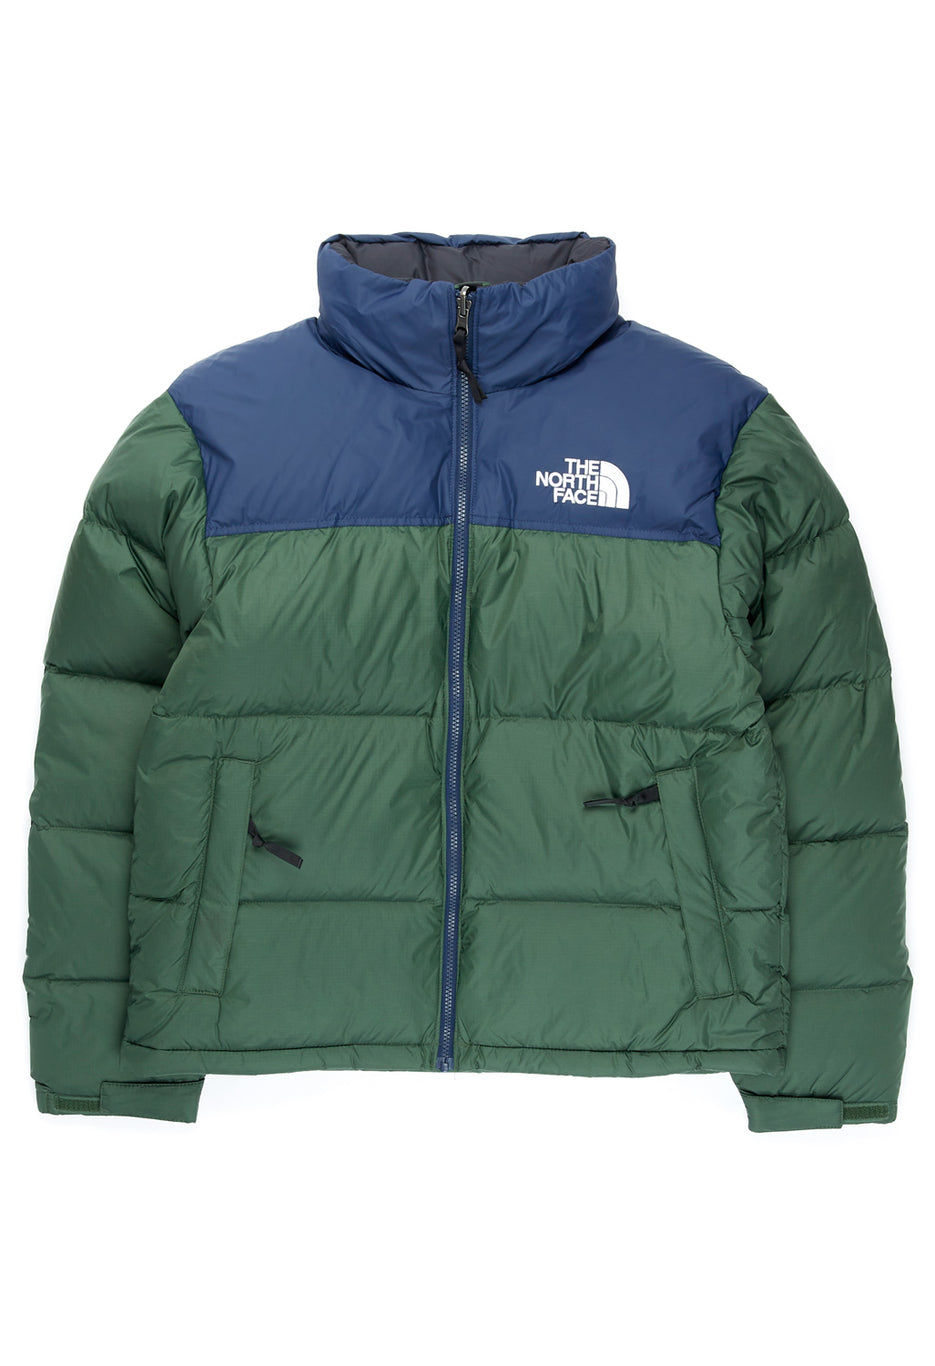 The North Face - Outsiders Store – Outsiders Store UK